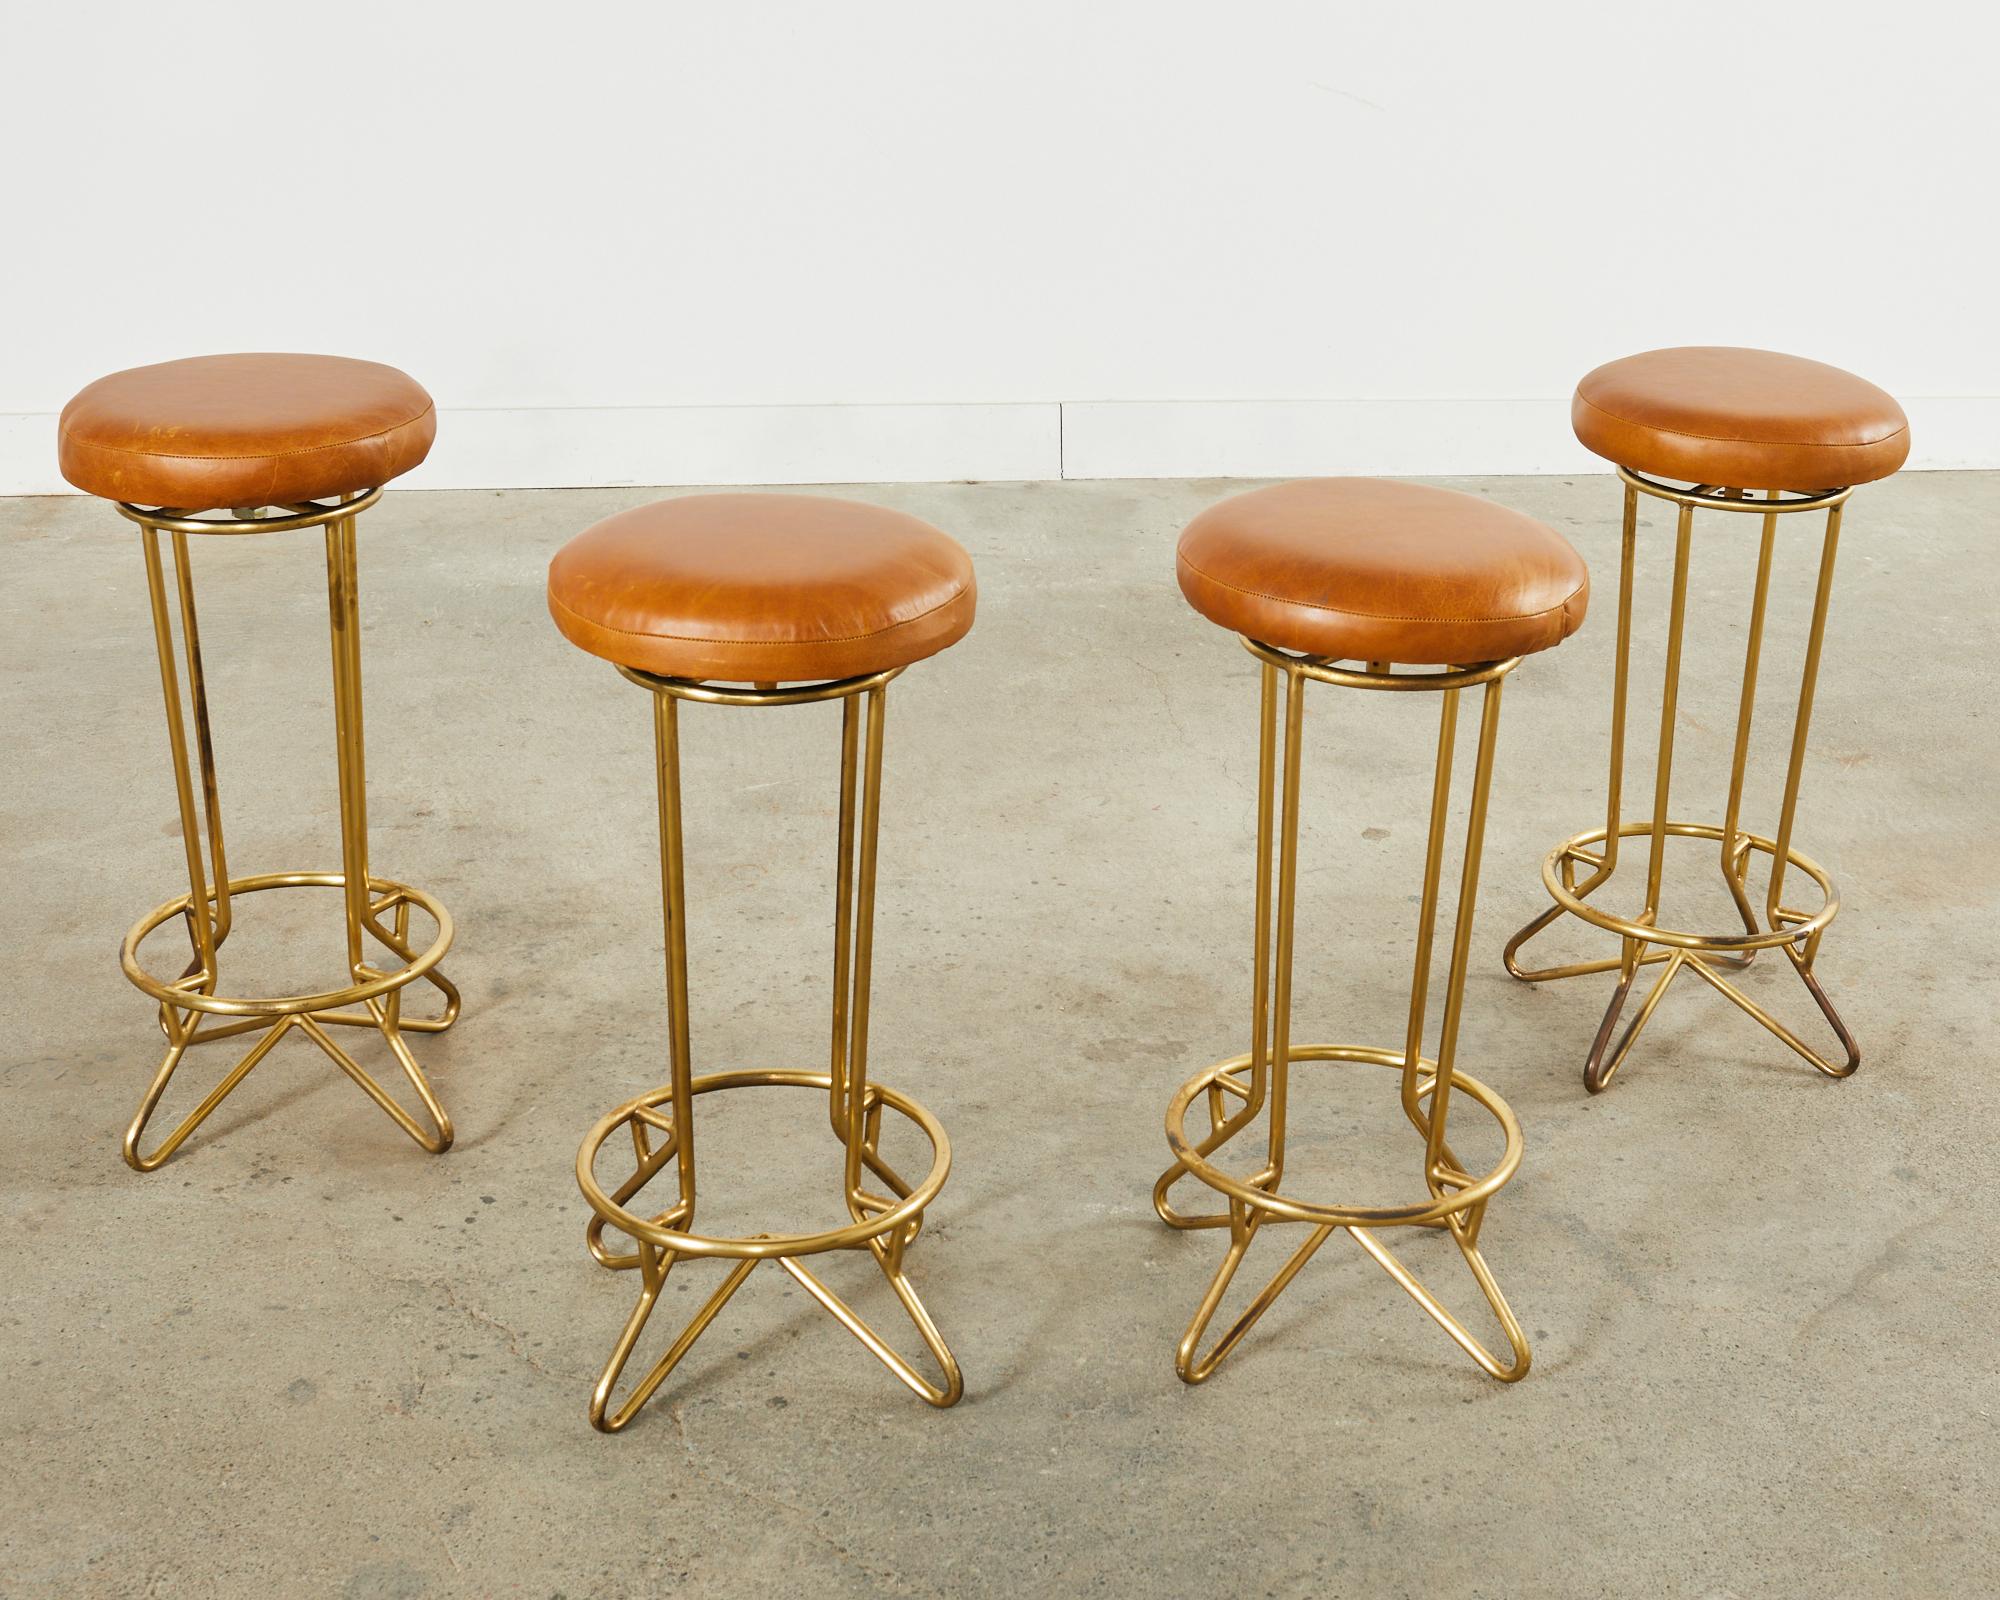 Amazing set of four Italian bronzed iron swivel bar stools made in the manner and style of Ico Parisi and Gio Ponti. Each stool is stamped 